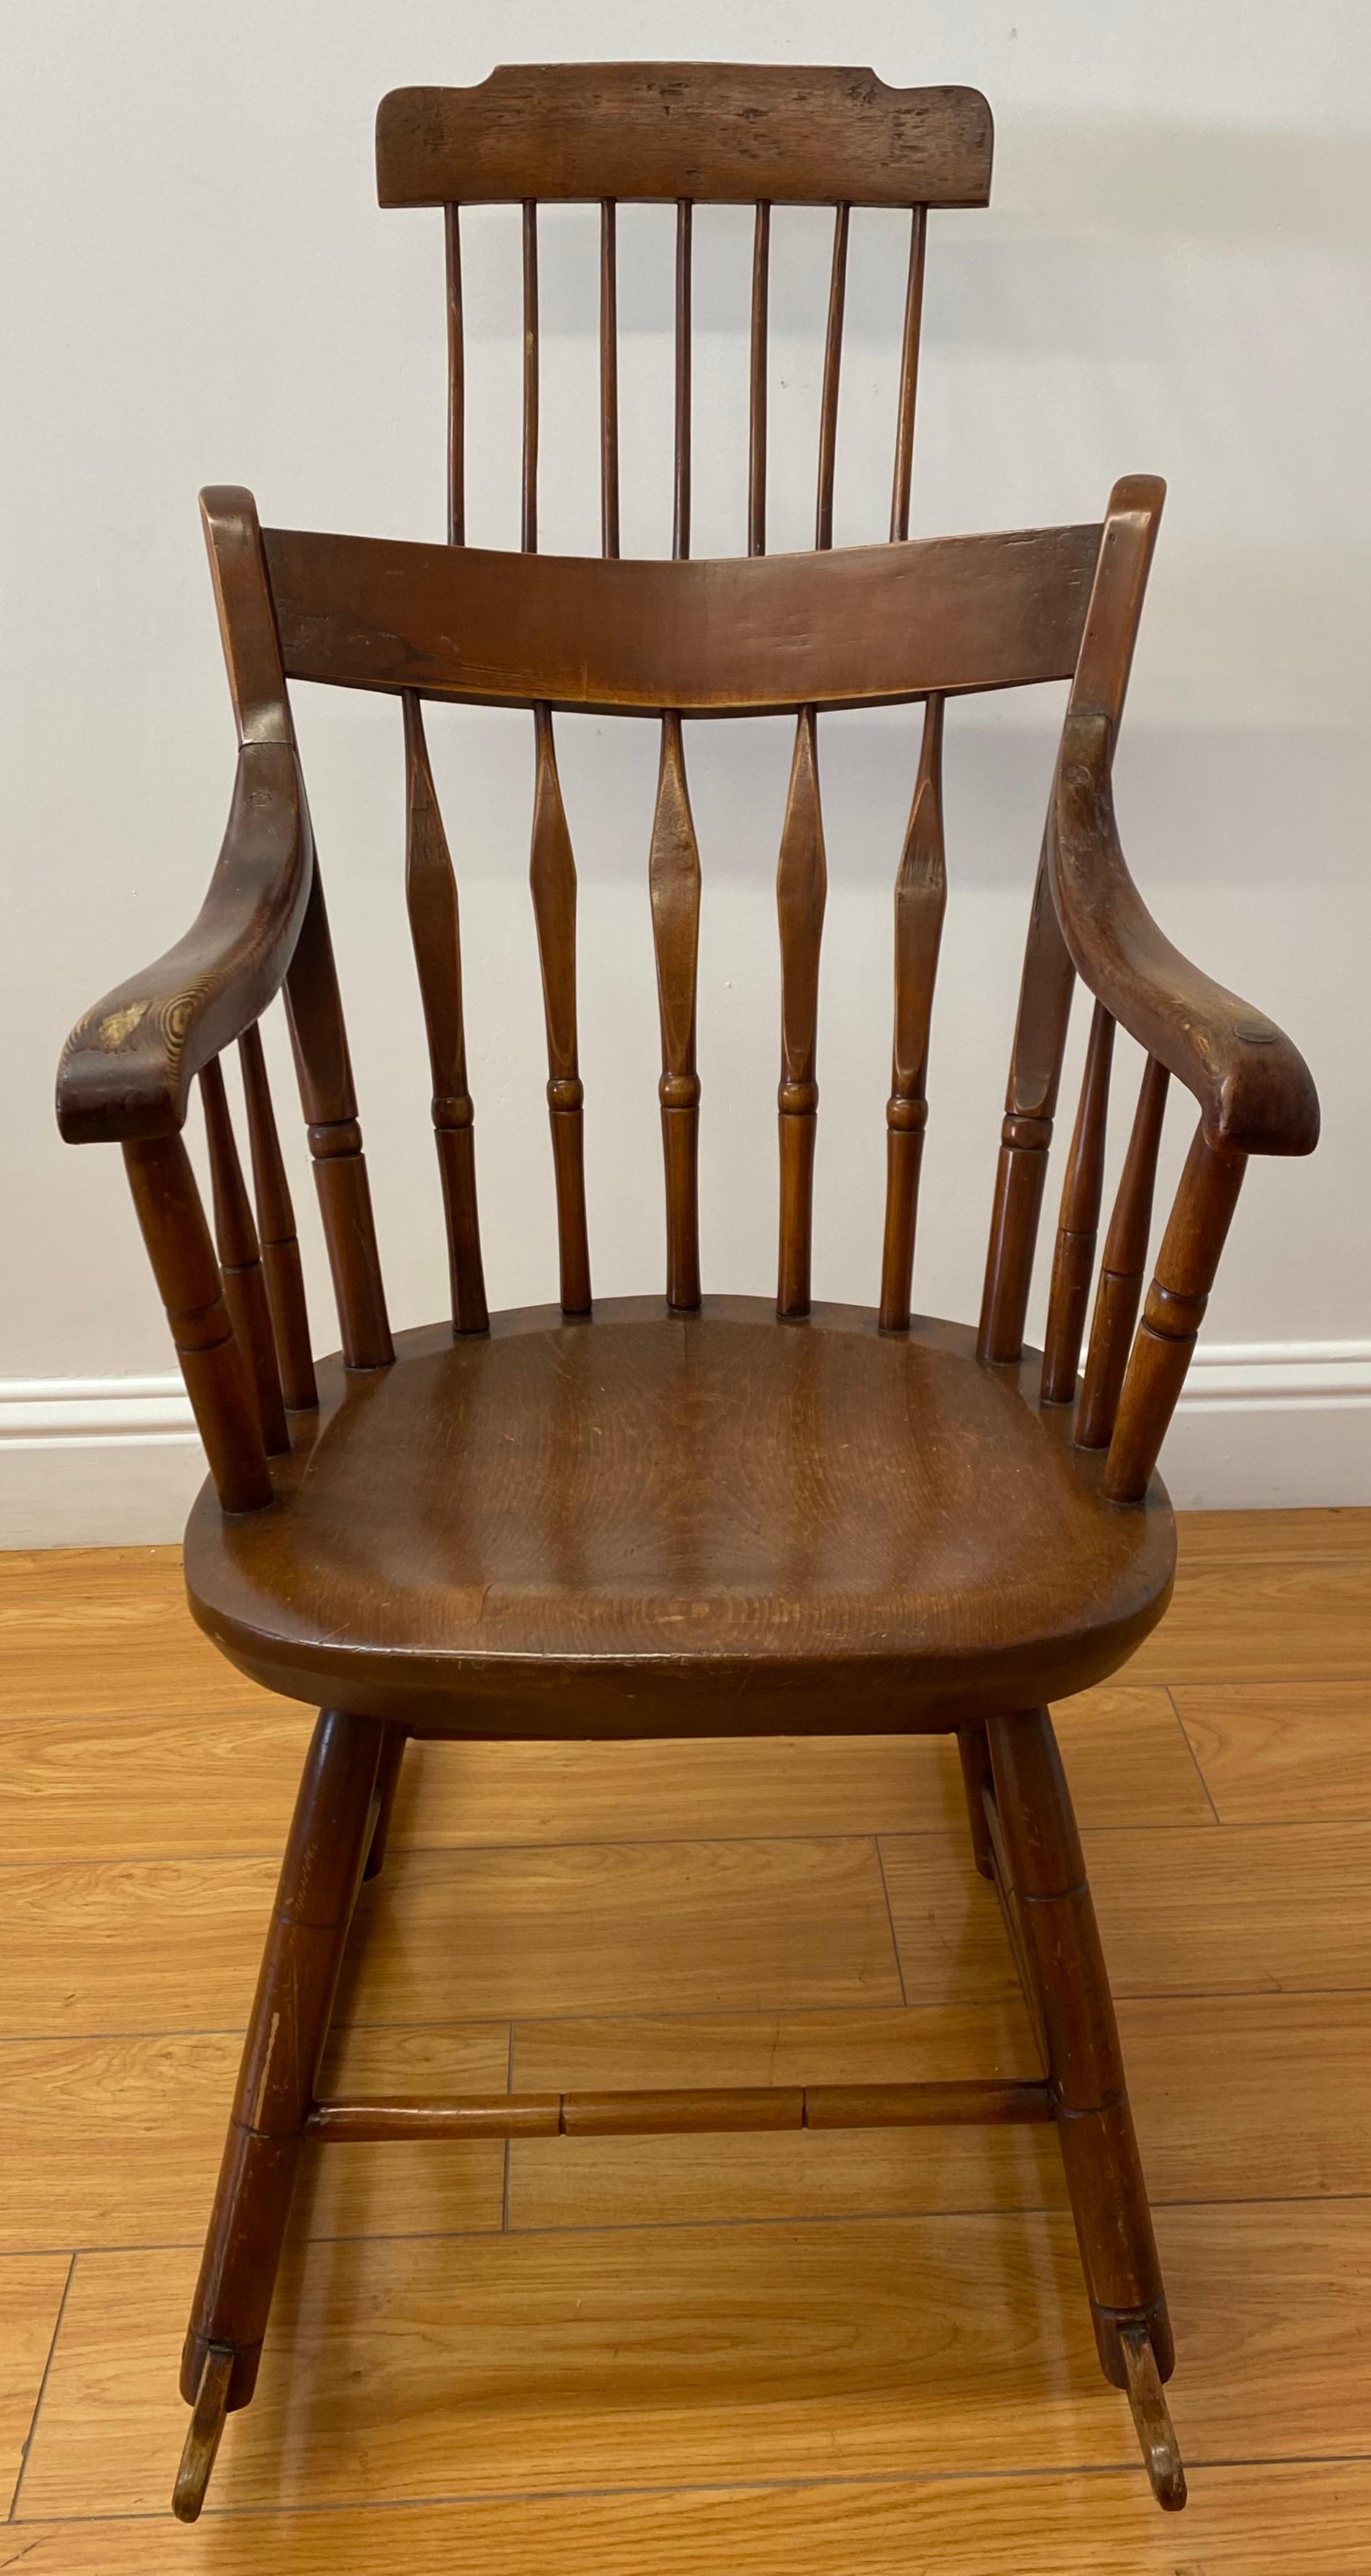 19th century American hitchcock high back rocking chair

Fine antique rocking chair - Classic American craftsmanship

Measures: 20